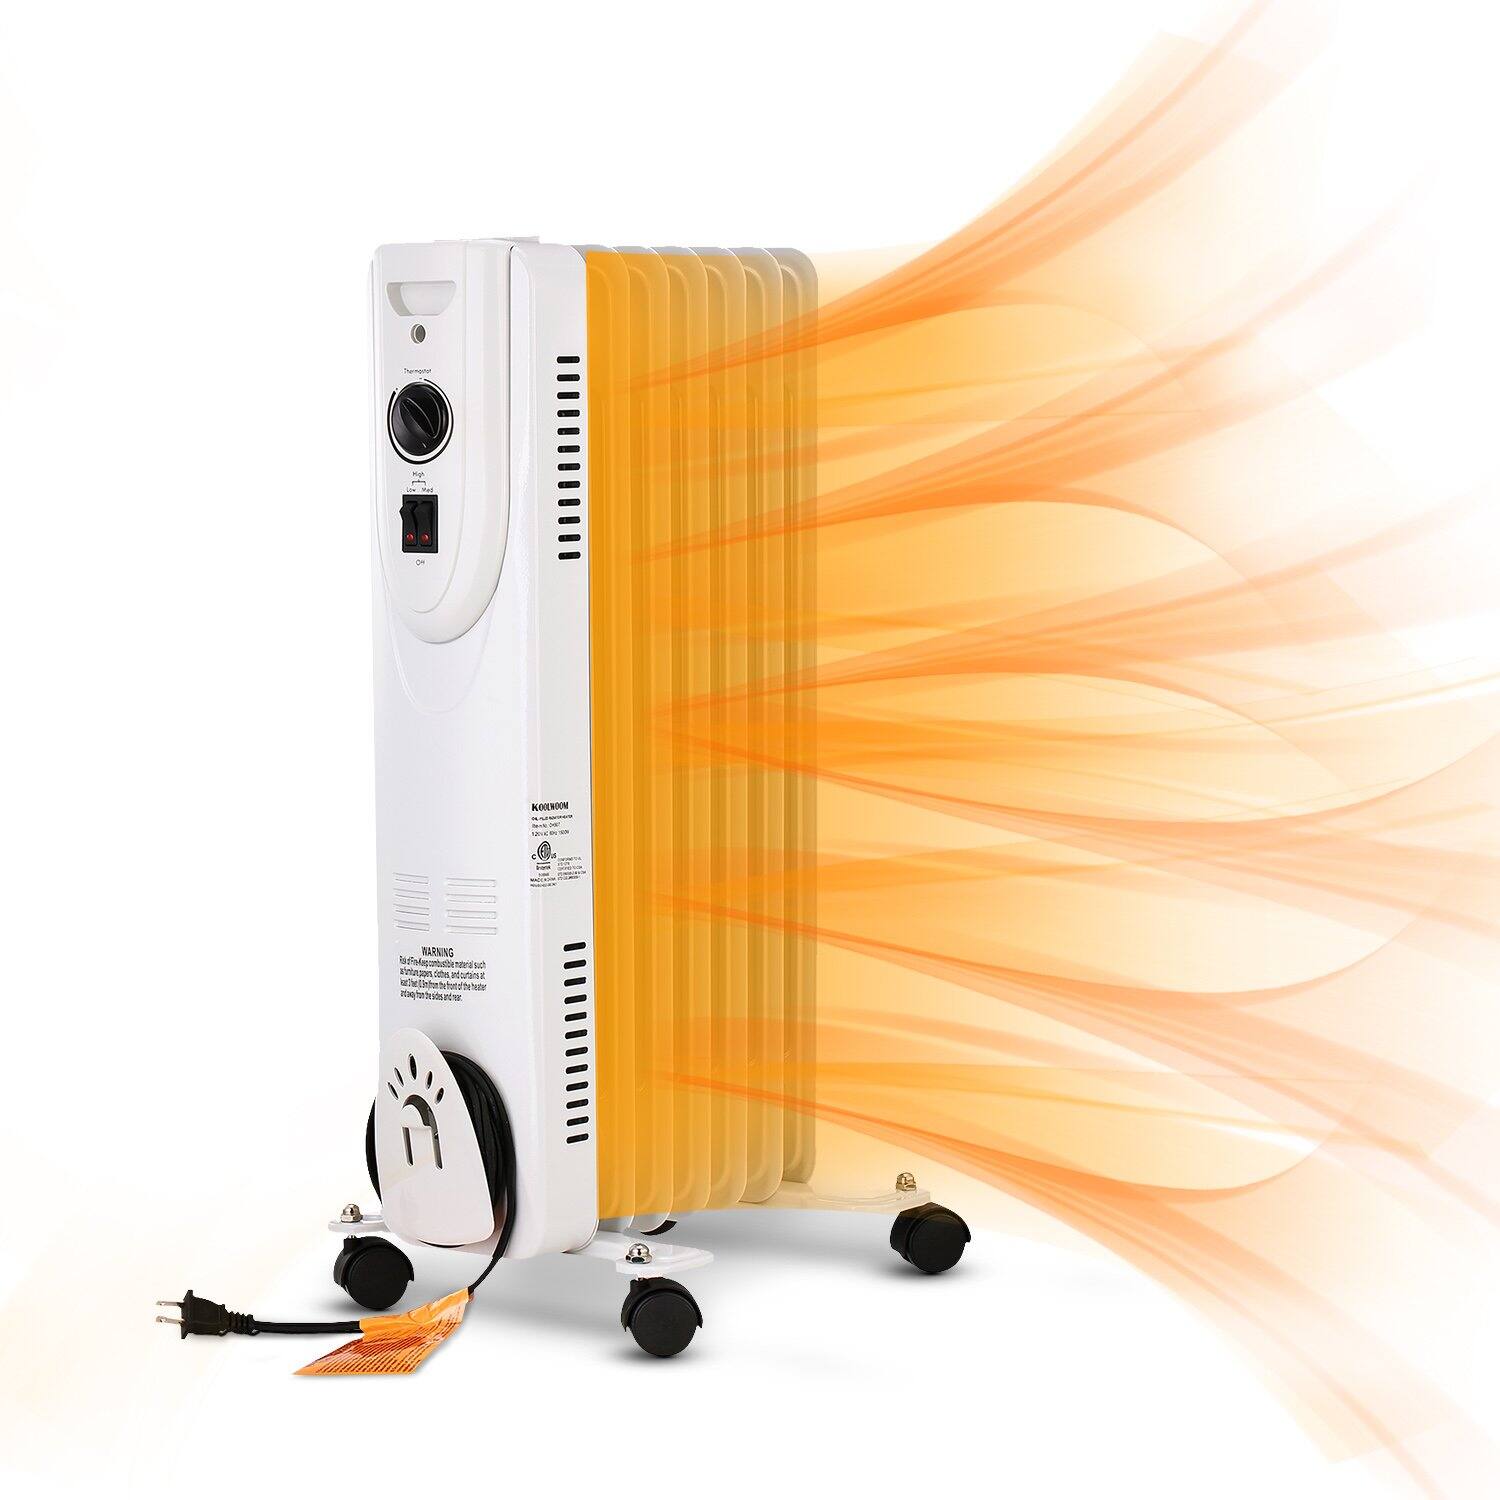 Ainfox Hs Oil Heater Space Heater For $25.50 +Free Shipping